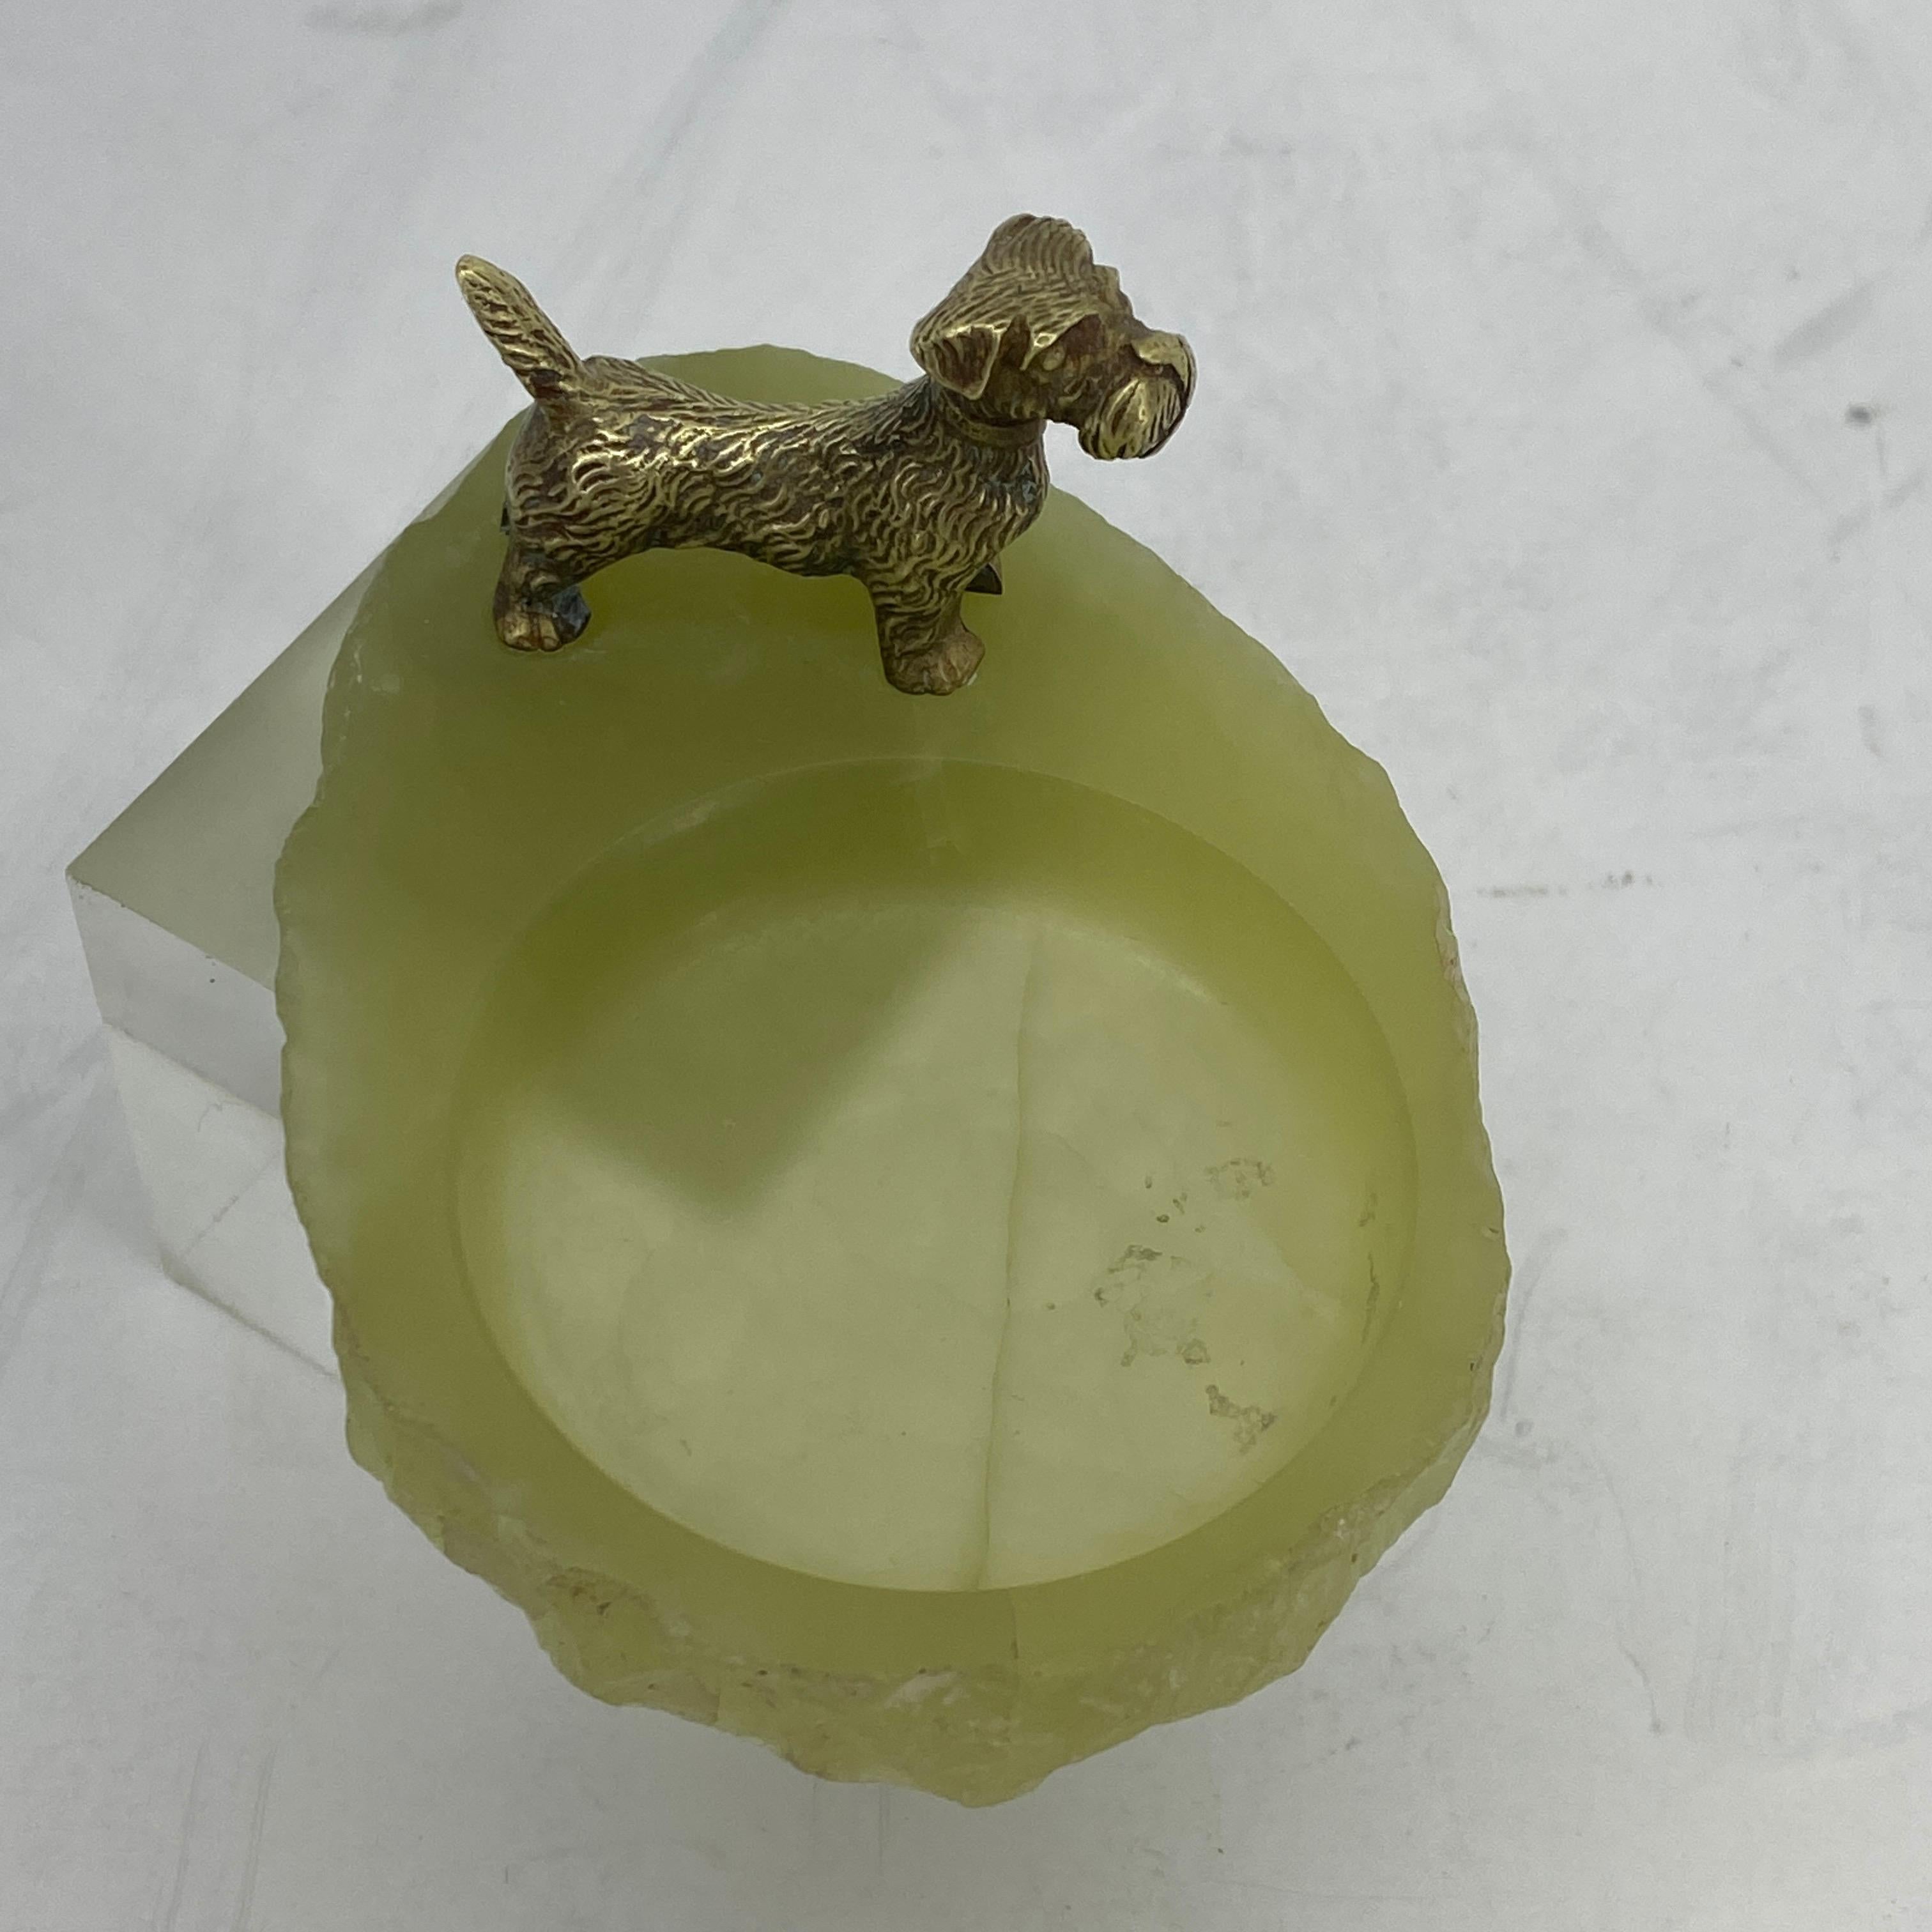 Pistachio Green Onyx and Bronze Terrier Ashtray or Jewelry Tray 9